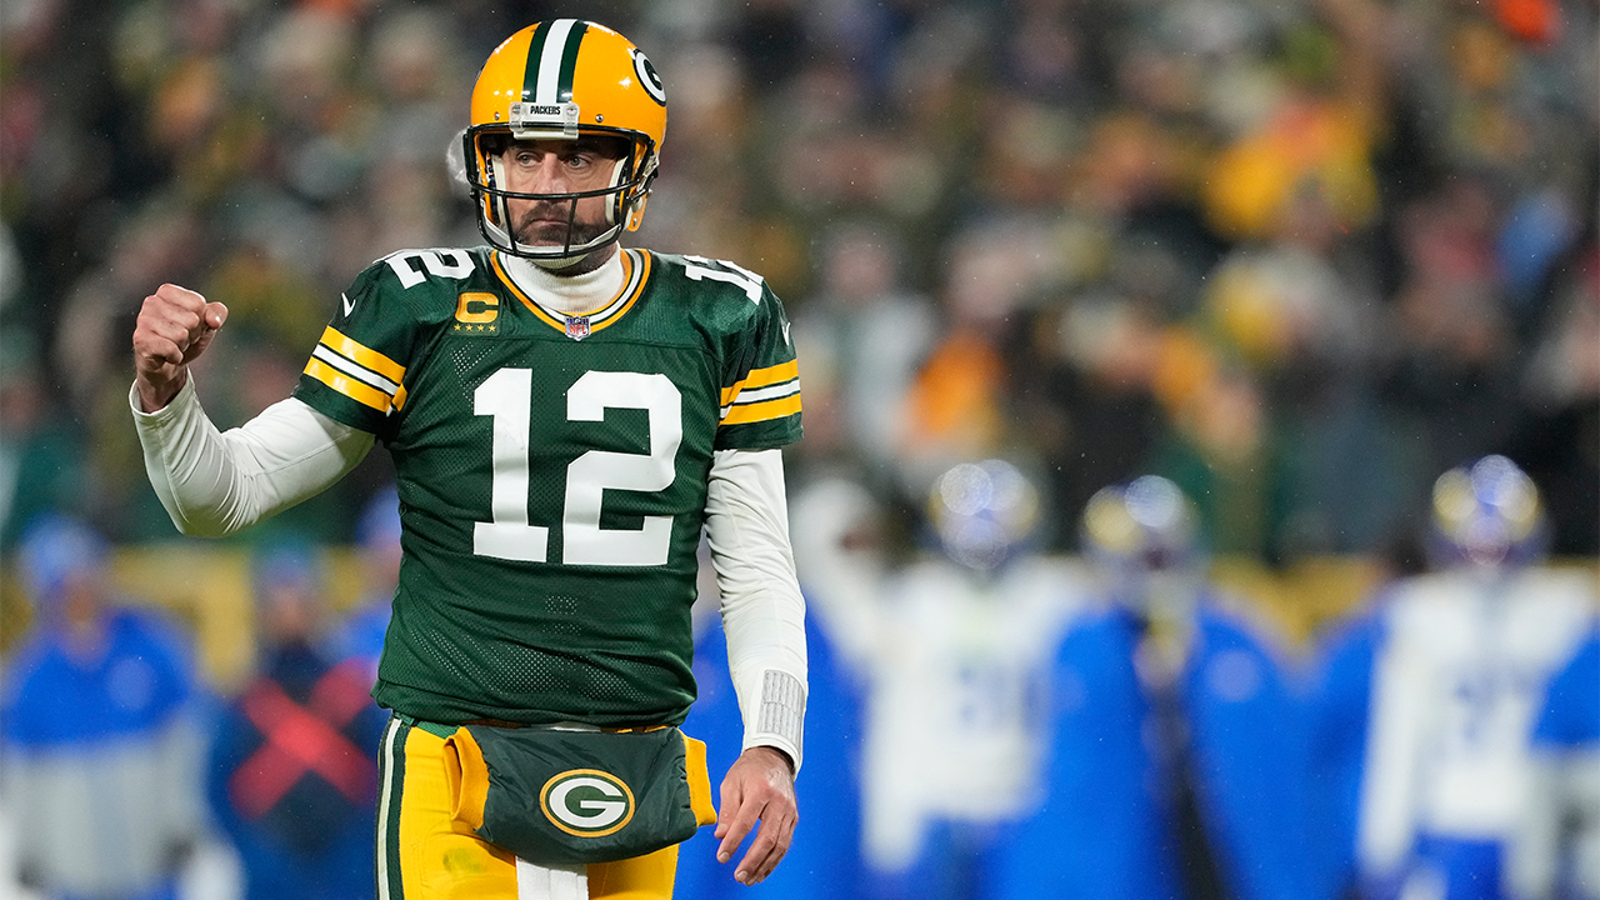 NFL Week 16: Will Aaron Rodgers and the Packers pour it on the Dolphins on Christmas Day?